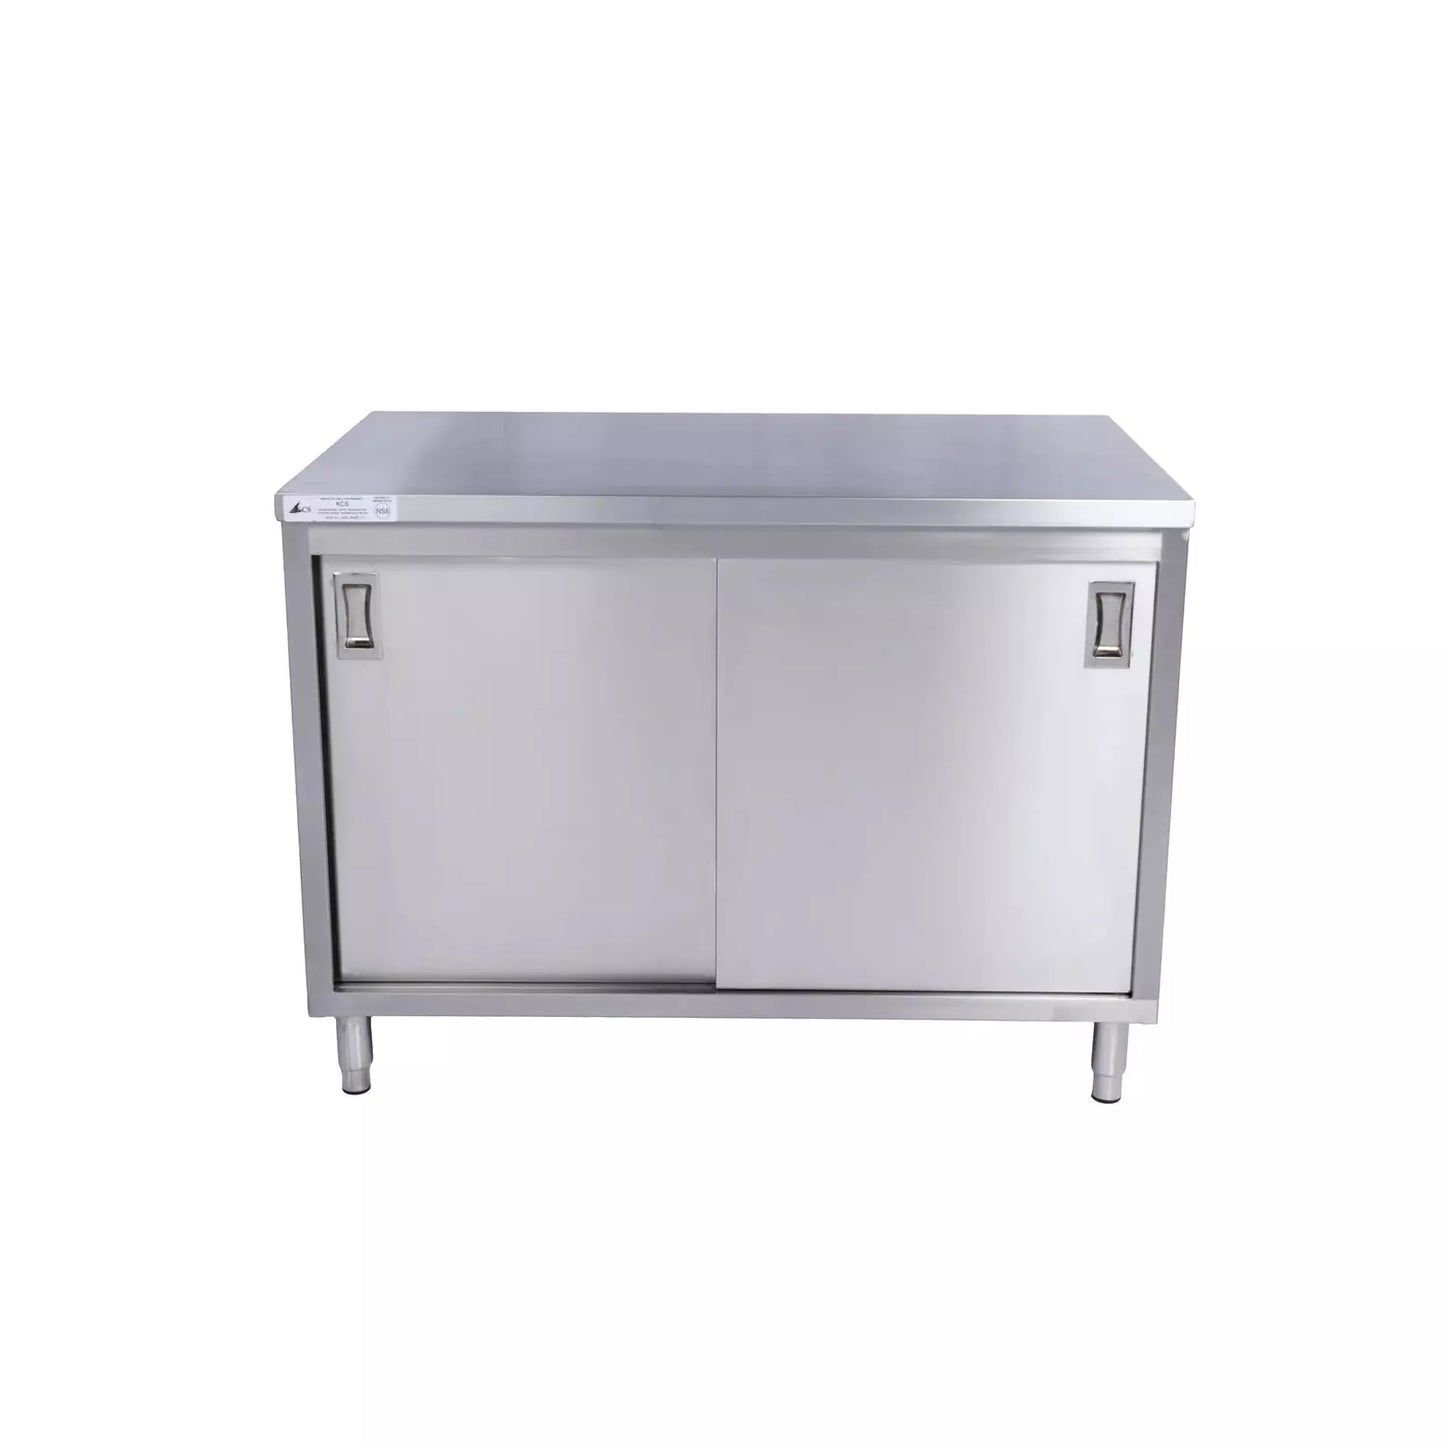 KCS CBS-2448 24" x 48" Stainless Steel Storage Welded Cabinet with 2 Sliding Doors